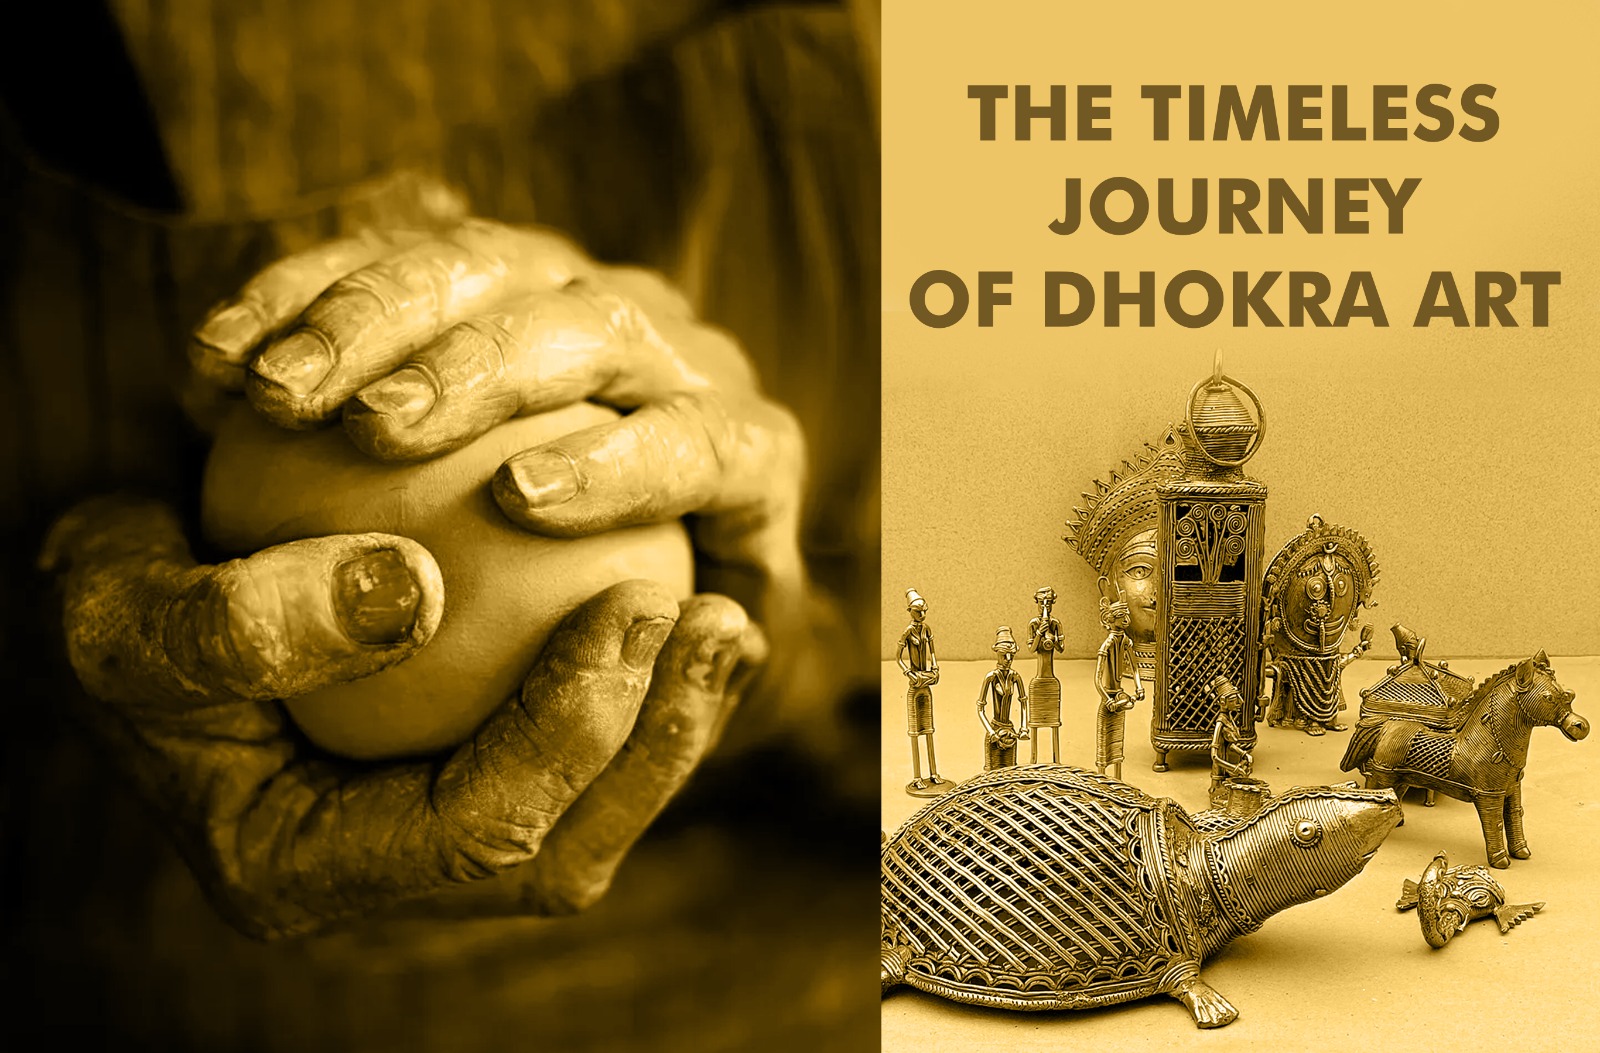 Discover the Timeless Journey of Dhokra Art